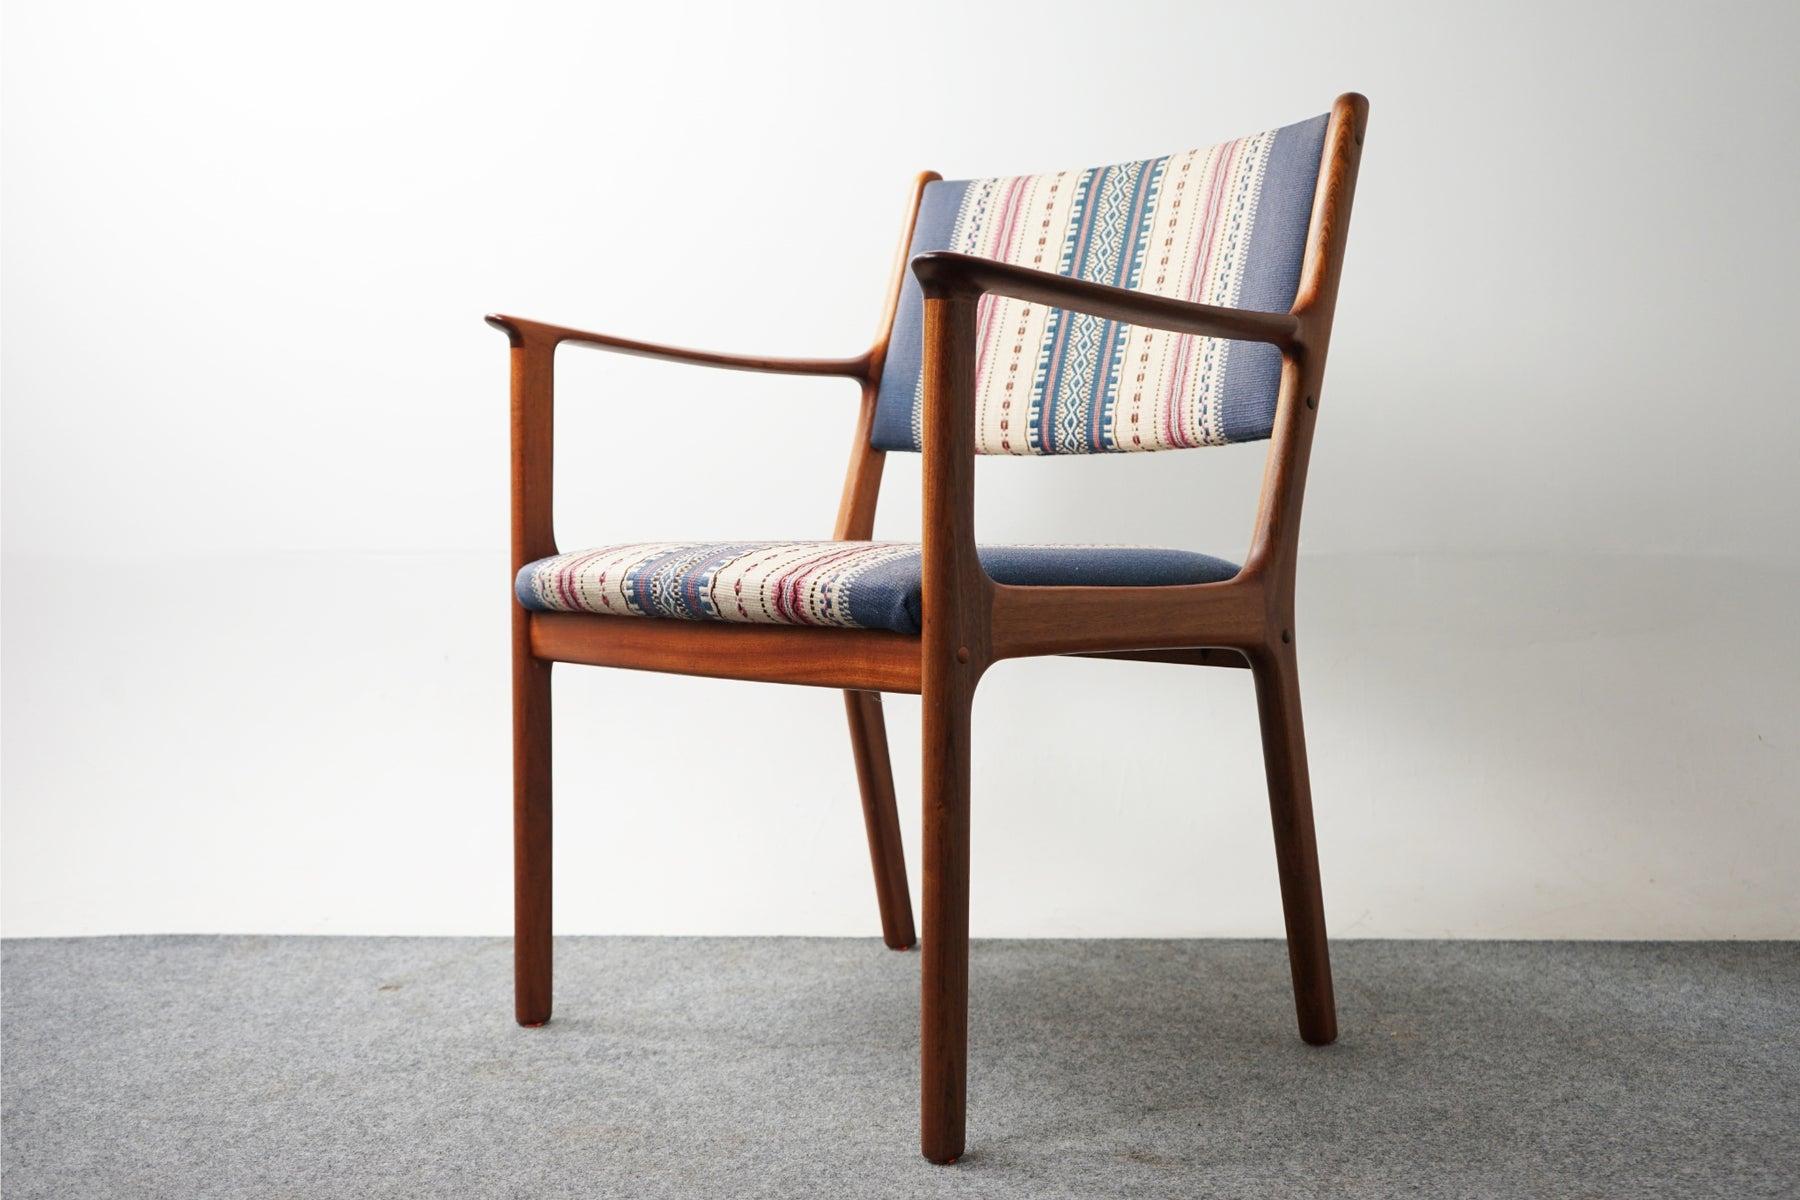 Mahogany Scandinavian arm chair by Ole Wanscher for P Jeppesen, circa 1960's. Solid wood frame with upright upholstered back provides support and comfort. Elegant frame with swooping arms is perfectly scaled for any room. Clean modern design makes